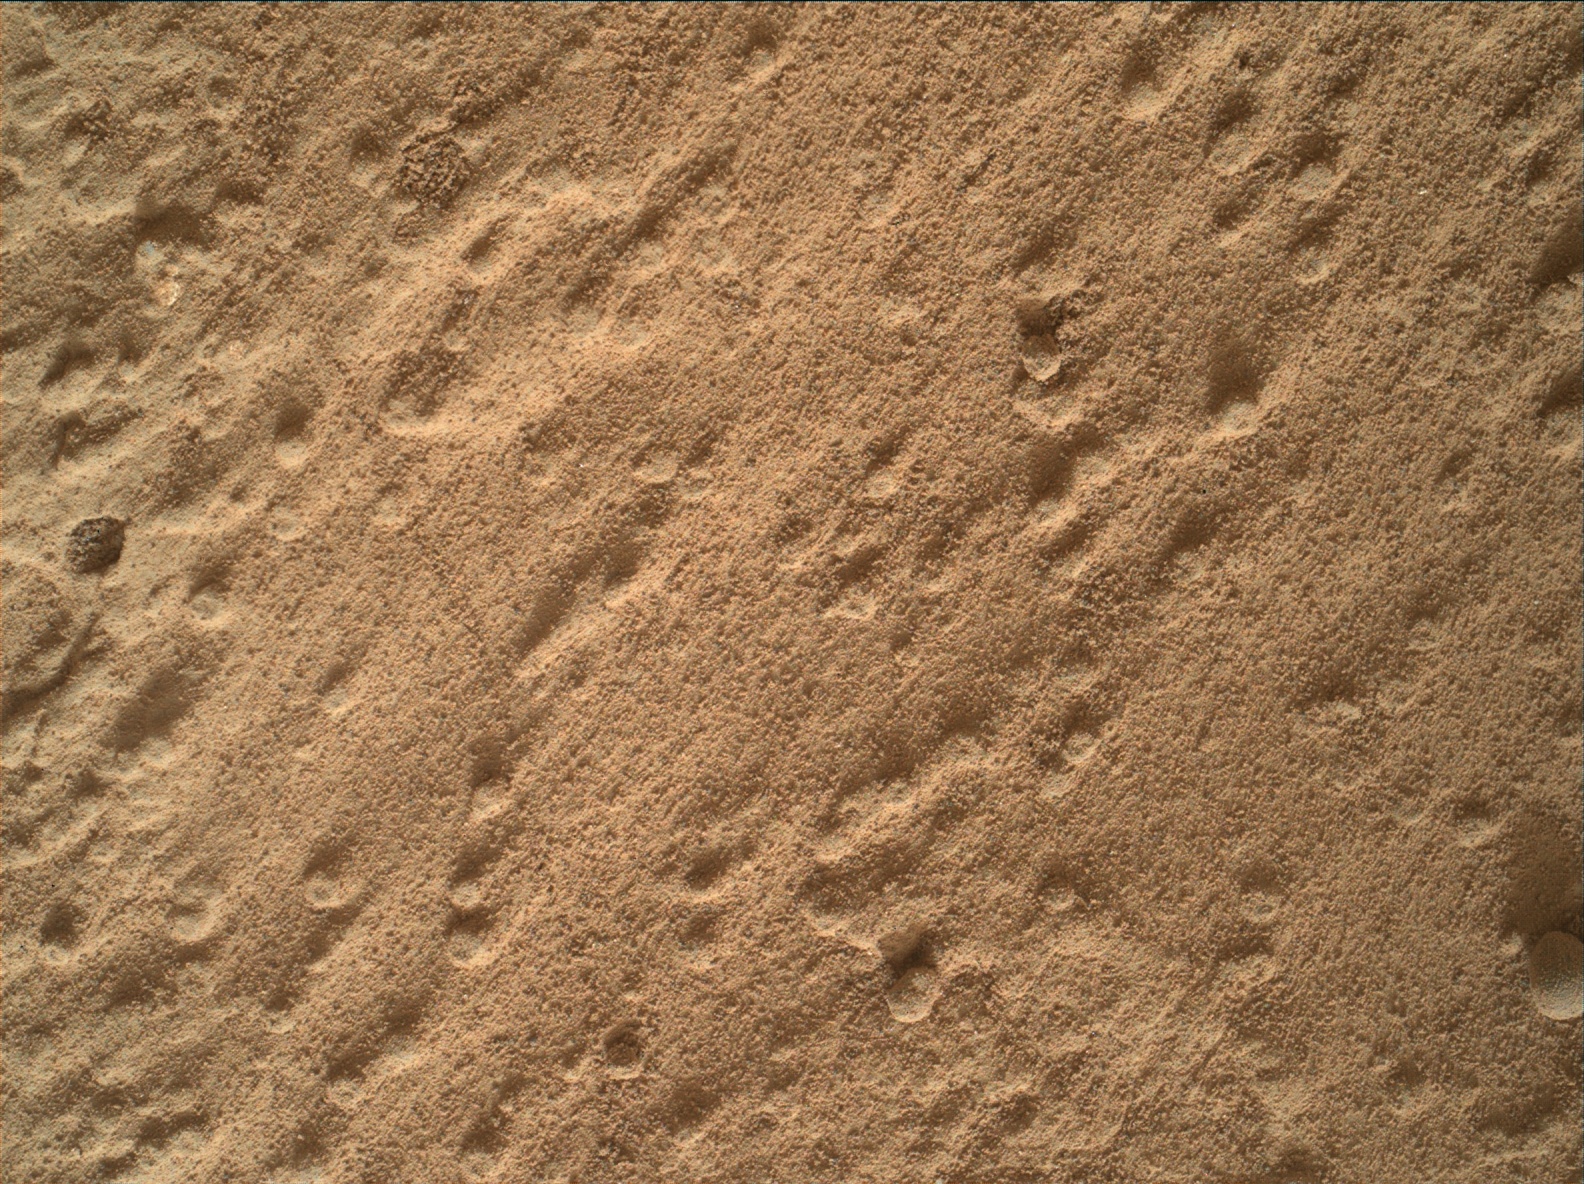 Nasa's Mars rover Curiosity acquired this image using its Mars Hand Lens Imager (MAHLI) on Sol 295